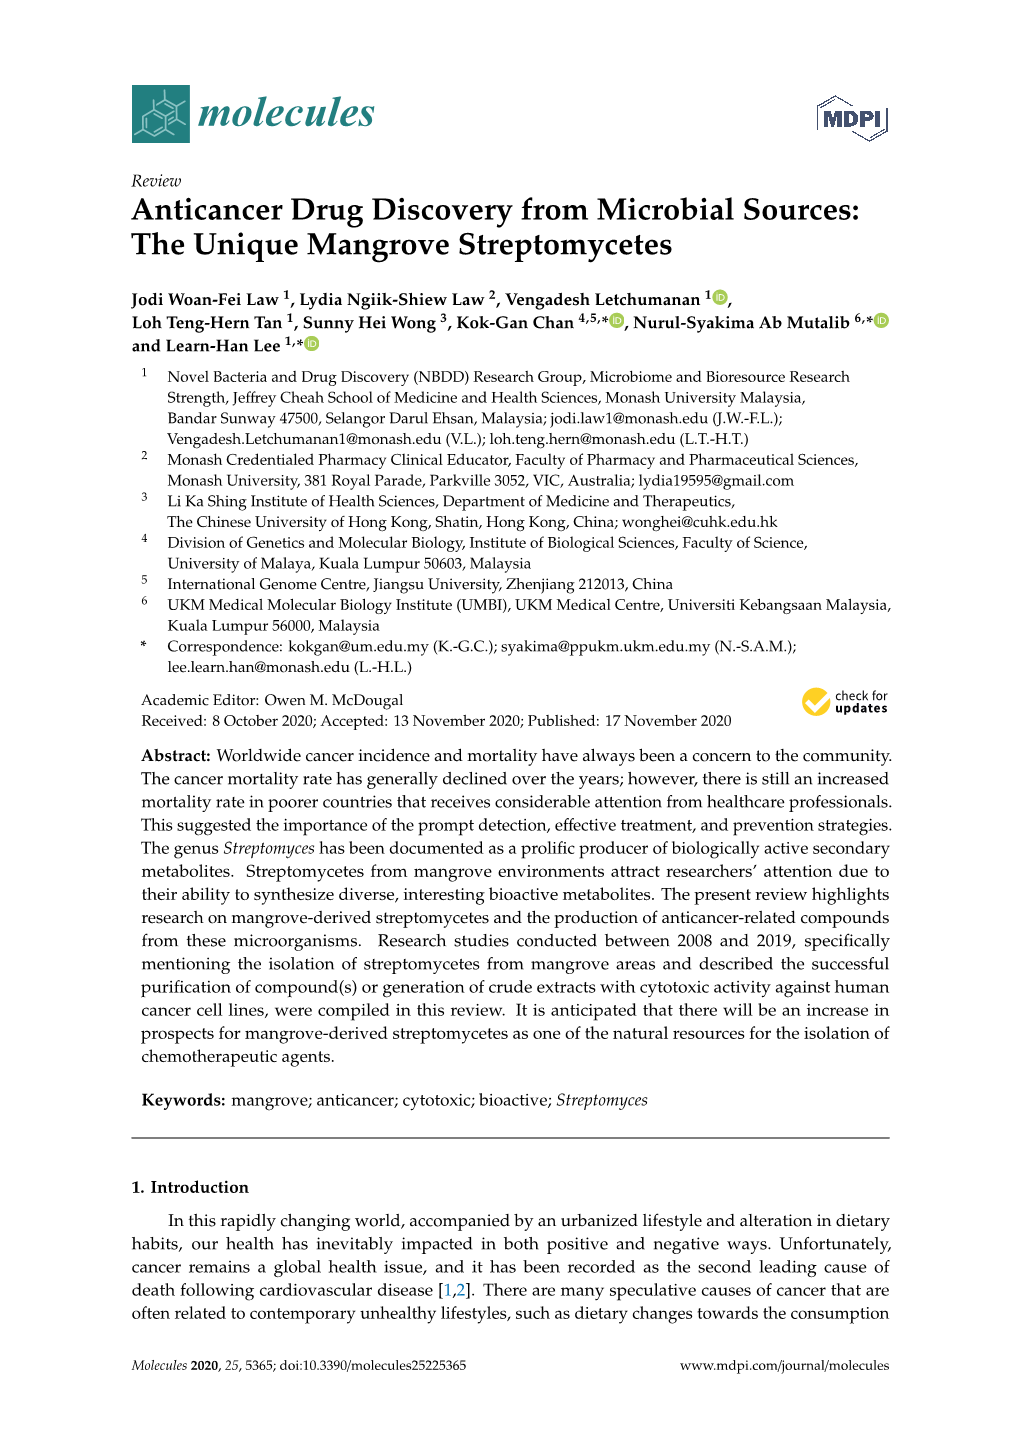 Anticancer Drug Discovery from Microbial Sources: the Unique Mangrove Streptomycetes